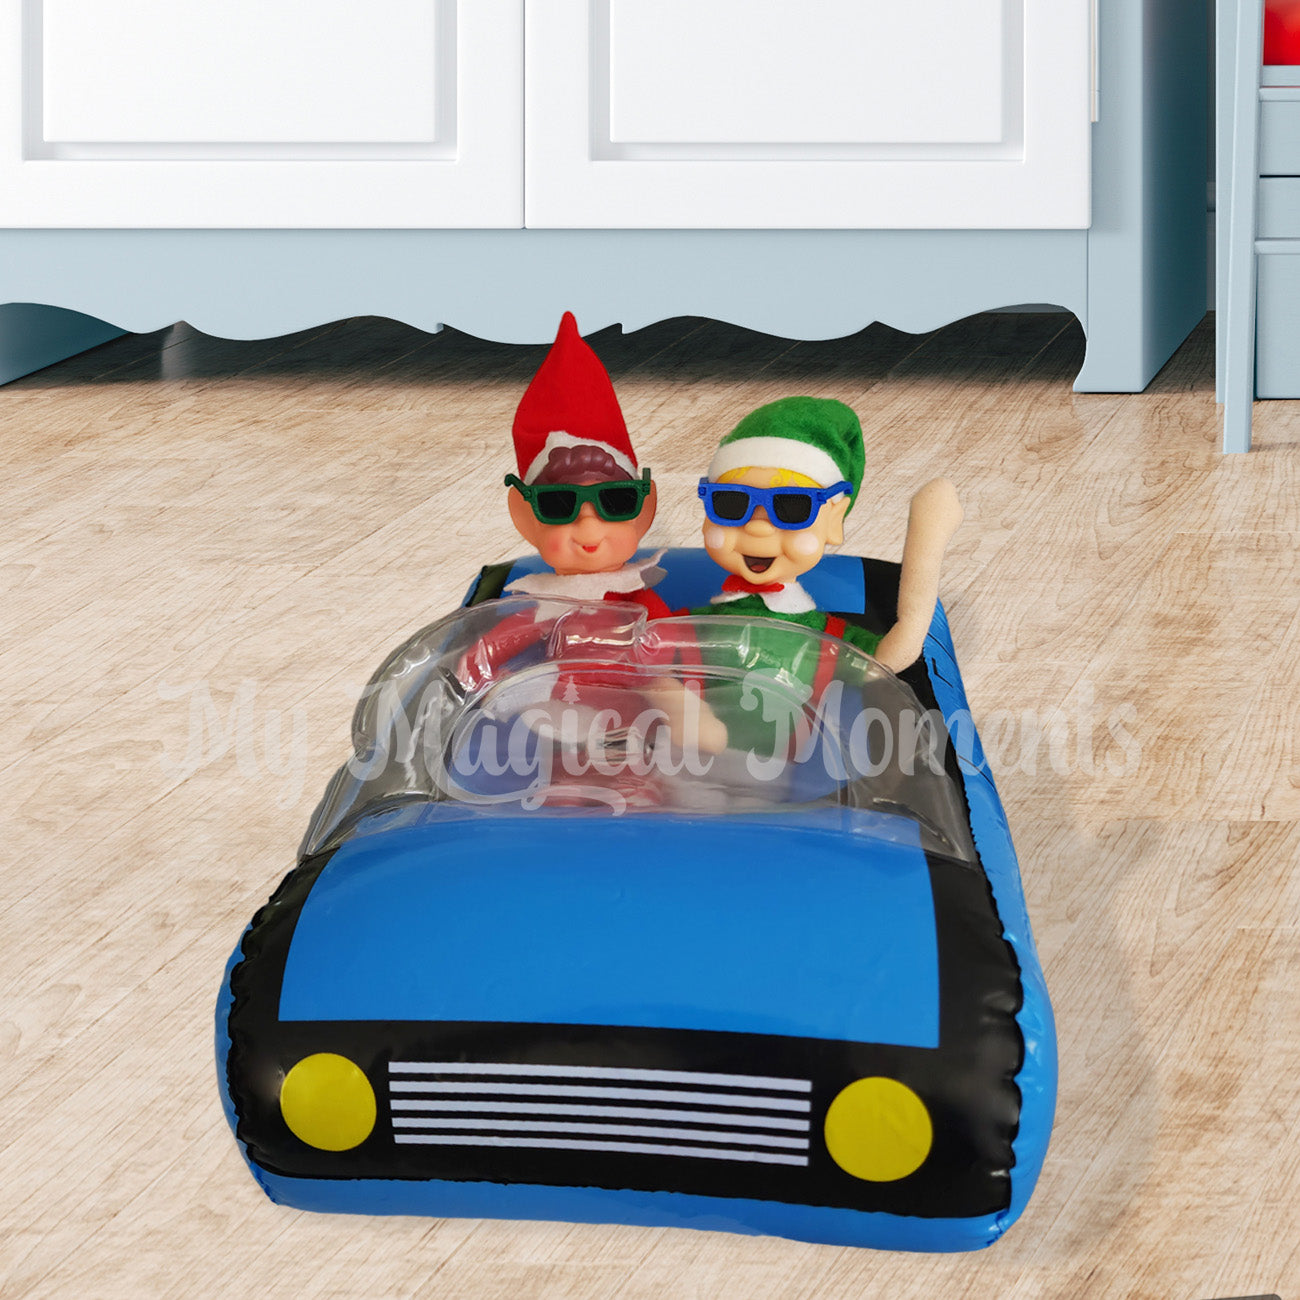 Elves driving in a car wearing sunniesElves driving in a car wearing sunnies